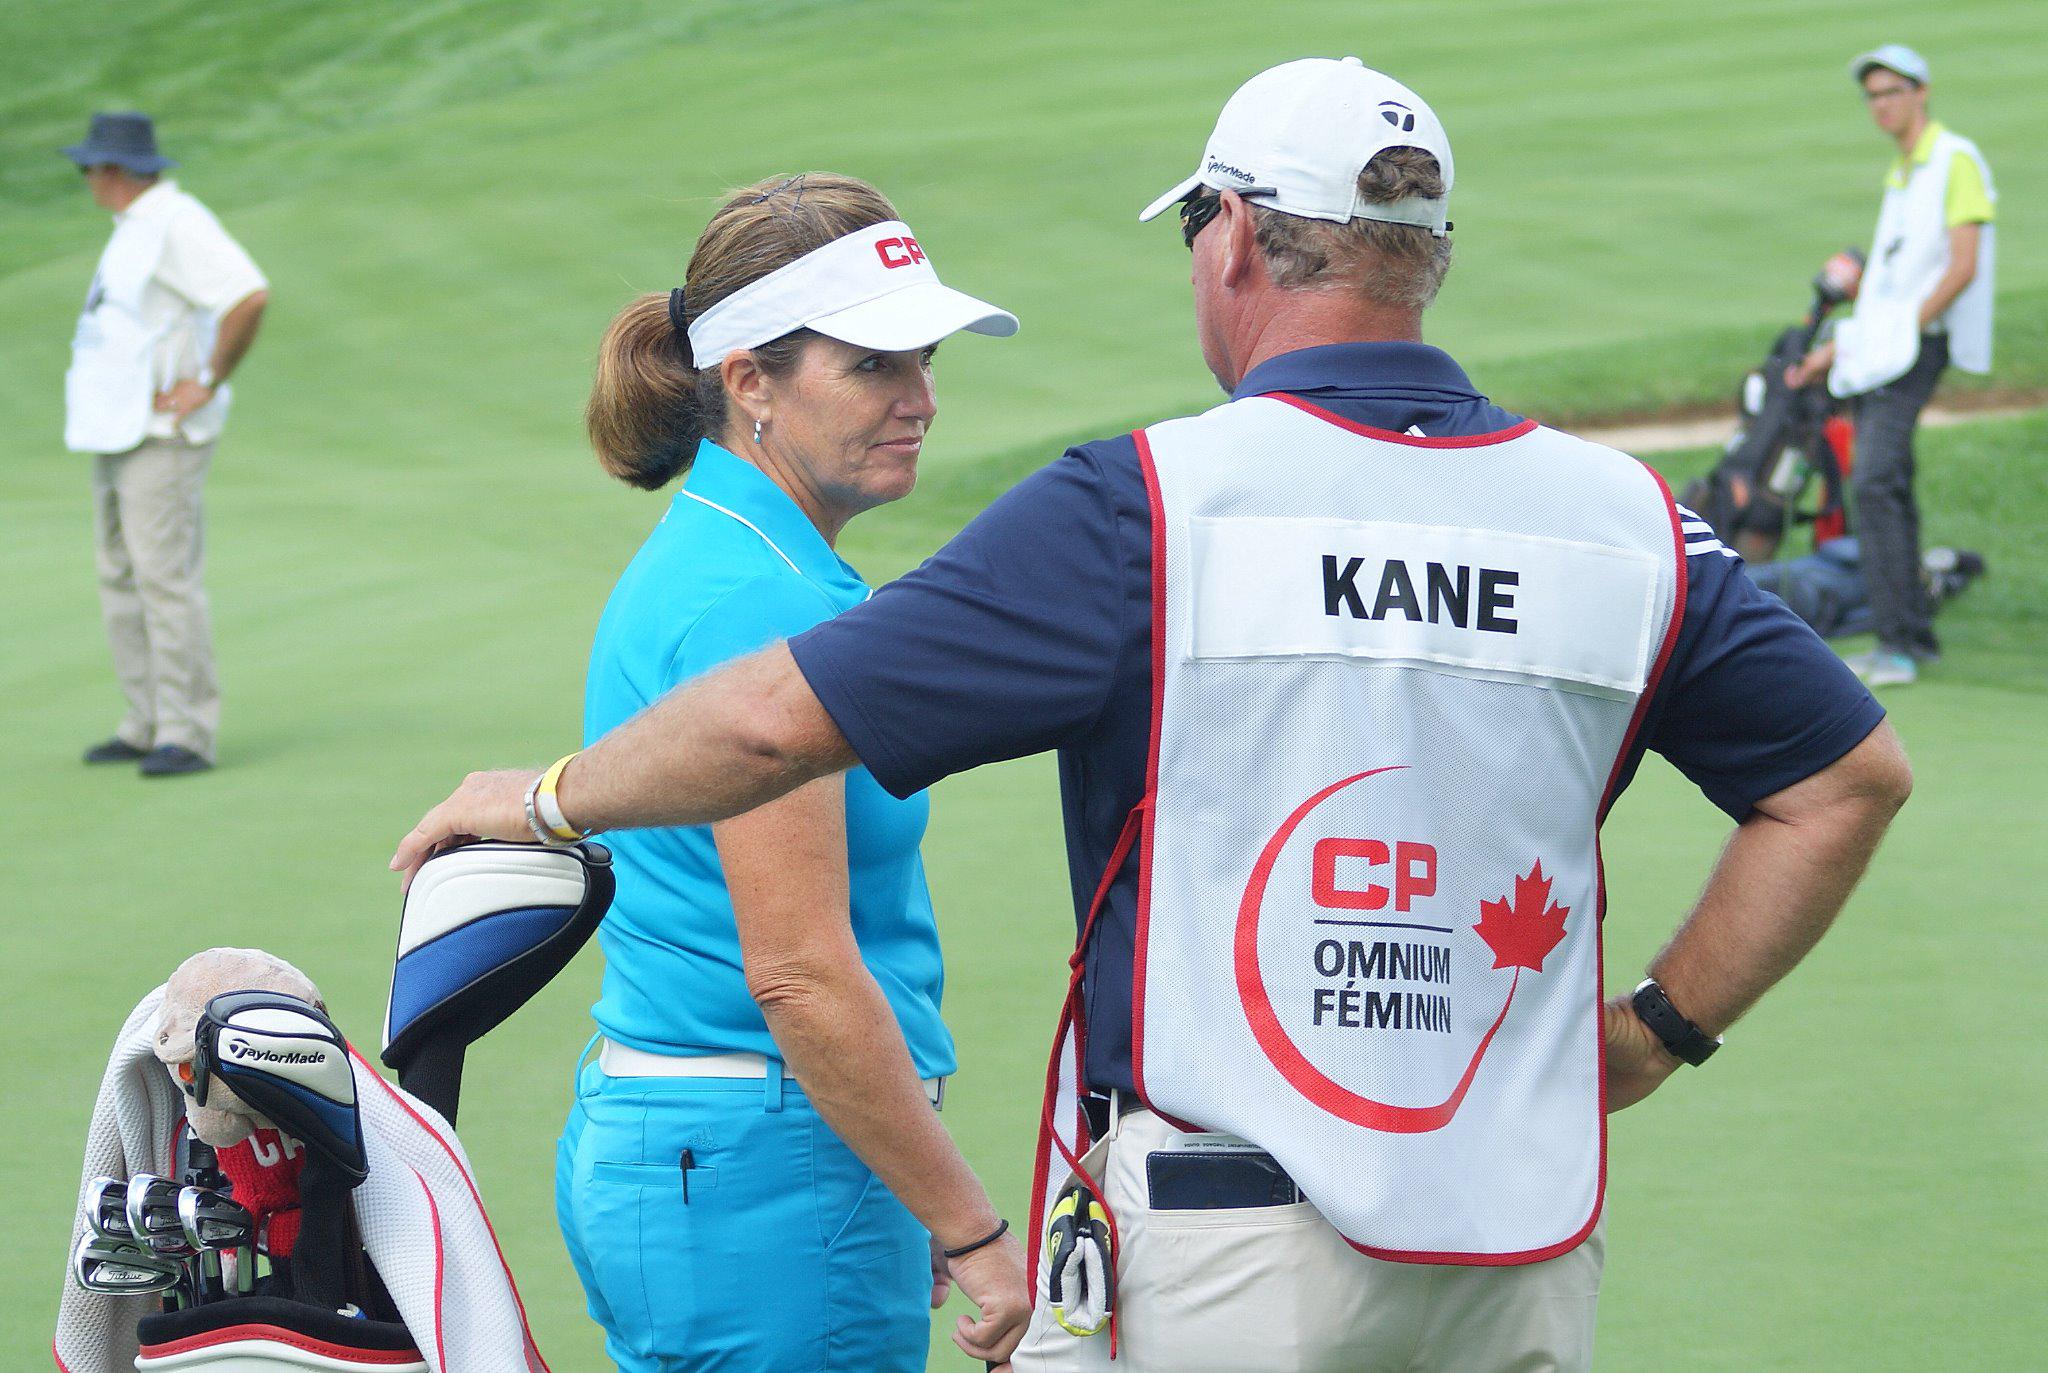 Early happy birthday 2 Canadas Lorie Kane, who turns 50 Dec. 19, heres a pic I took of Lorie and caddy Danny Sharp 